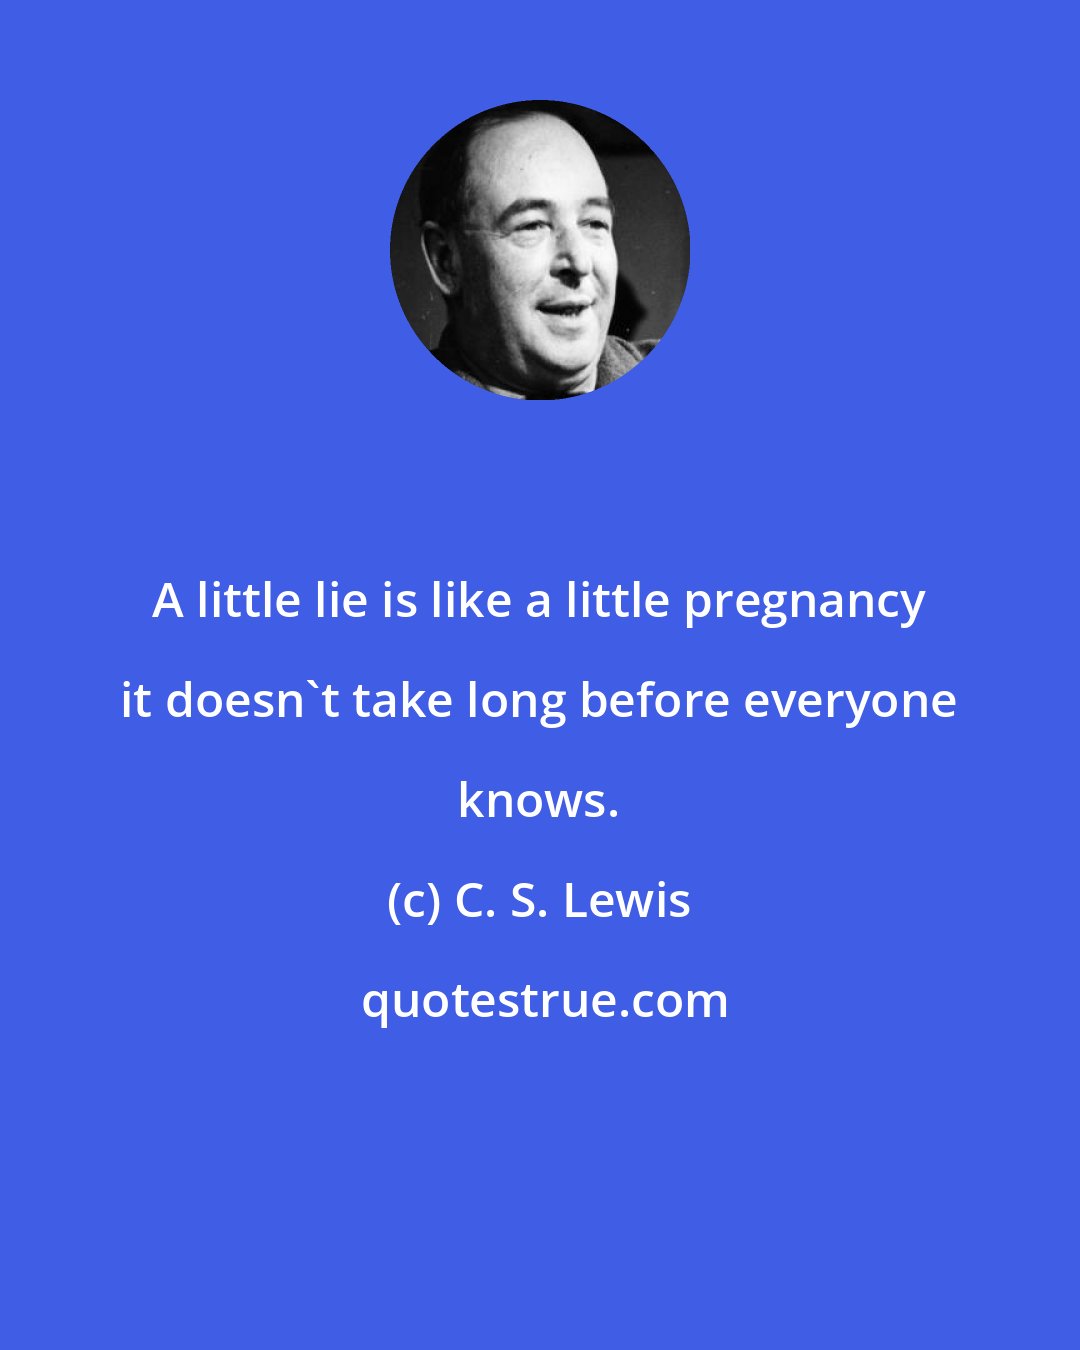 C. S. Lewis: A little lie is like a little pregnancy it doesn't take long before everyone knows.